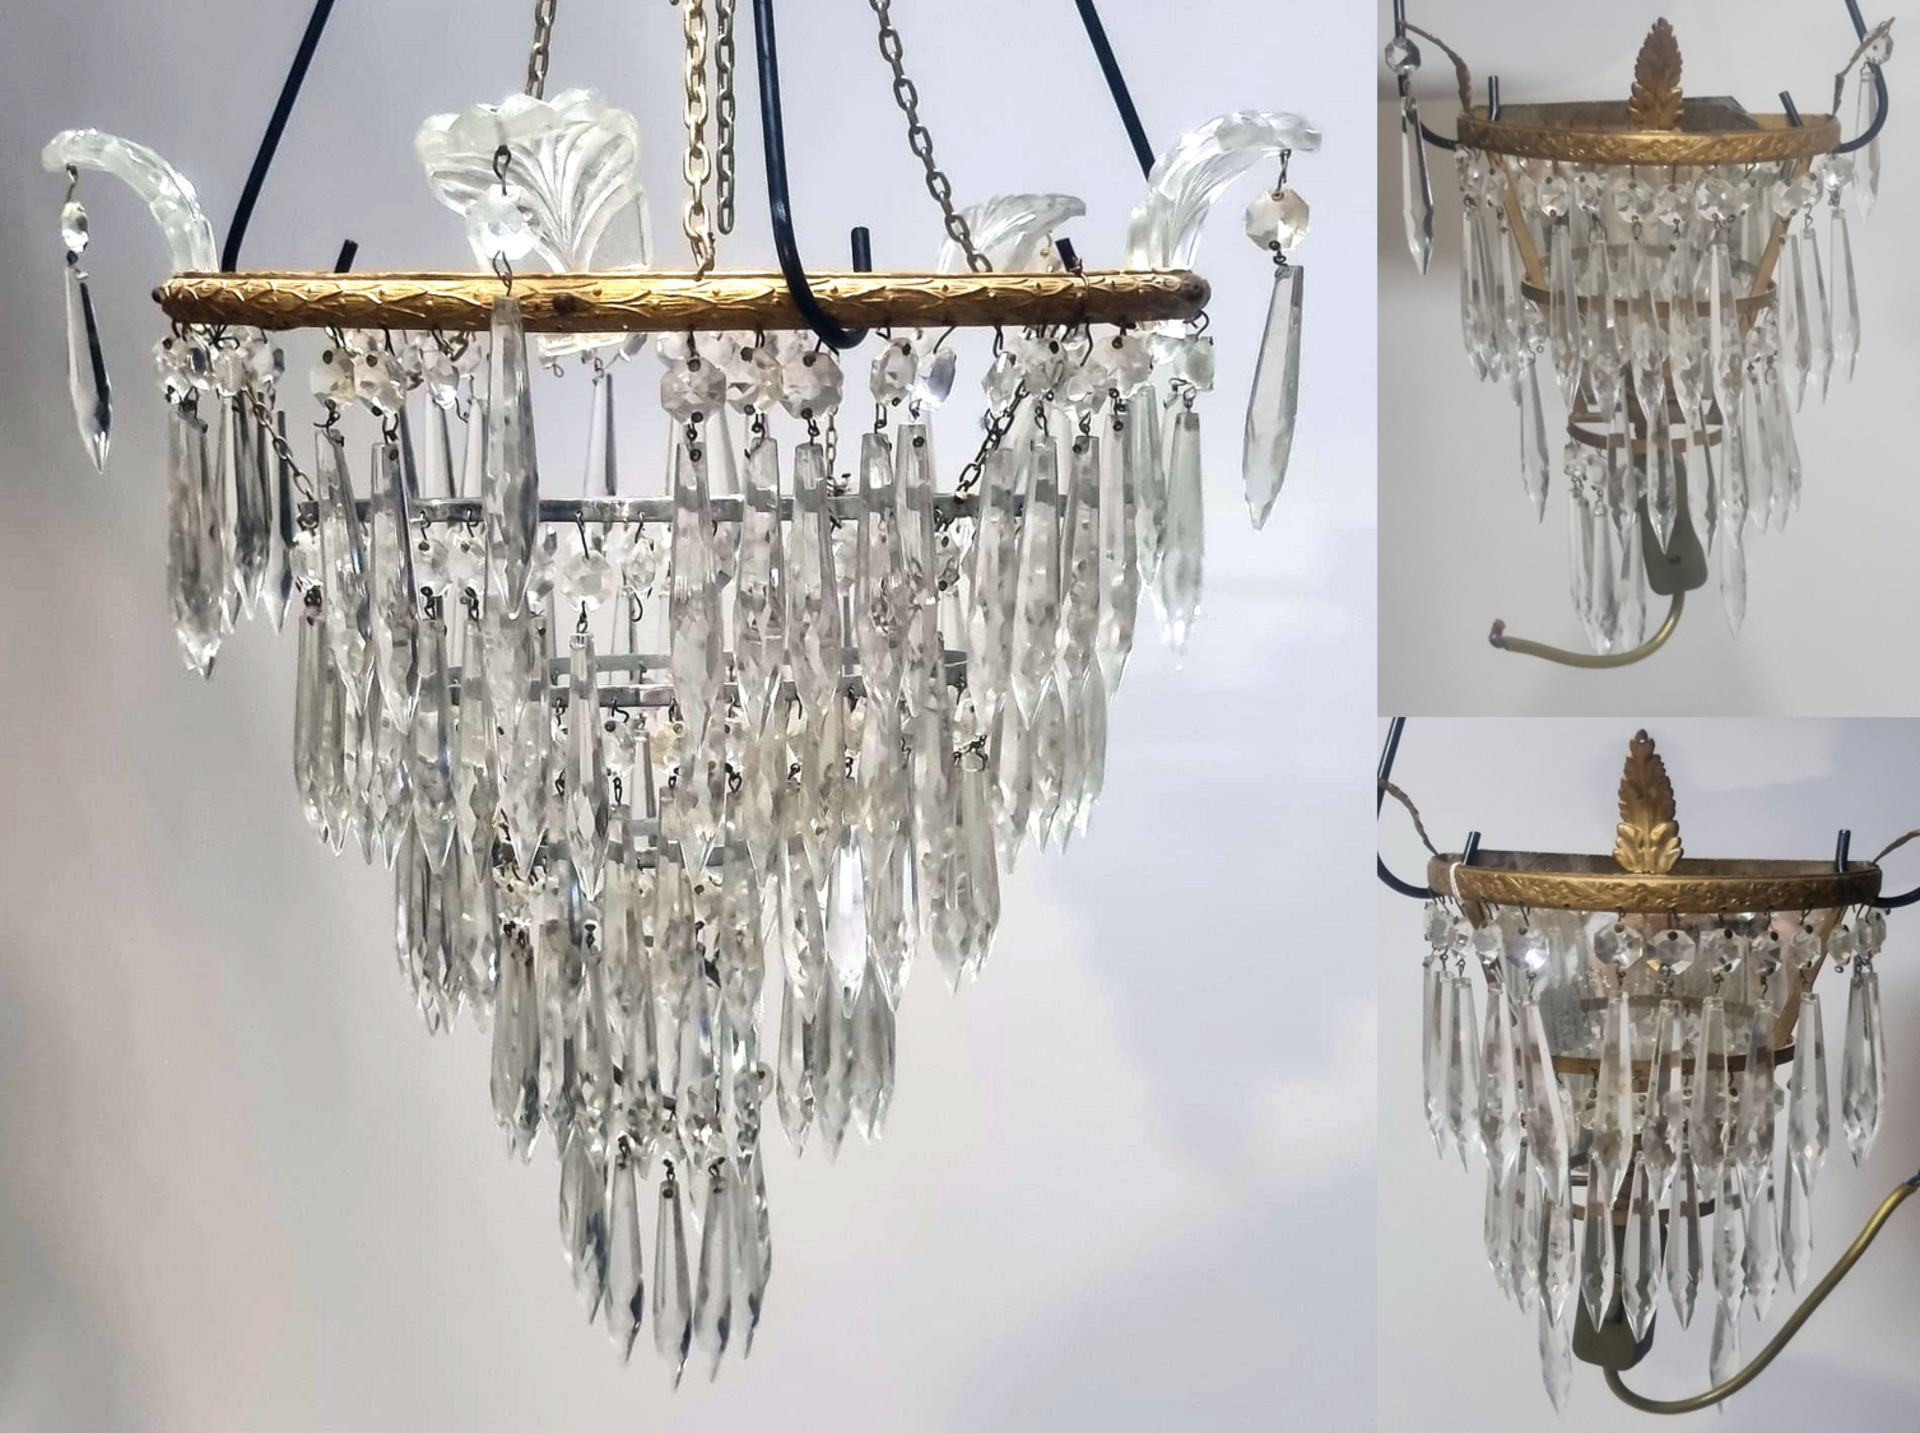 SET OF EARLY 20TH CENTURY FACETED CUT GLASS LIGHTING